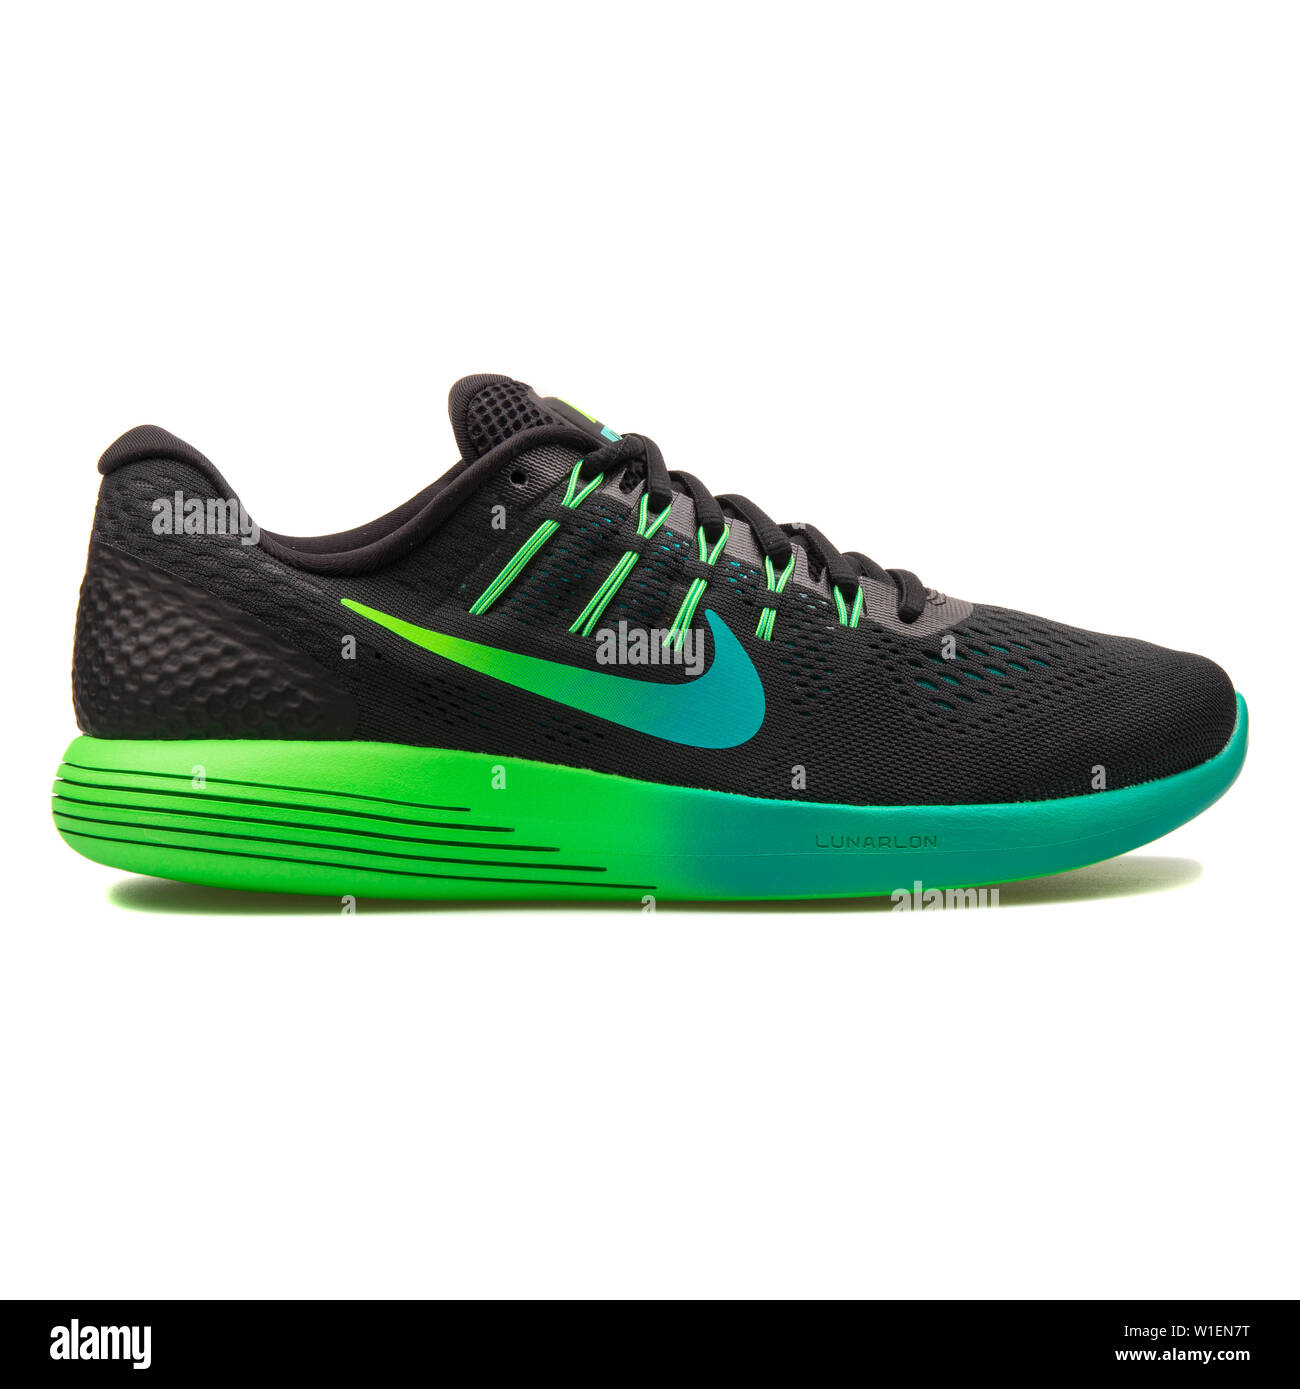 VIENNA, AUSTRIA - AUGUST 30, 2017: Nike Lunarglide 8 black and green  sneaker on white background Stock Photo - Alamy